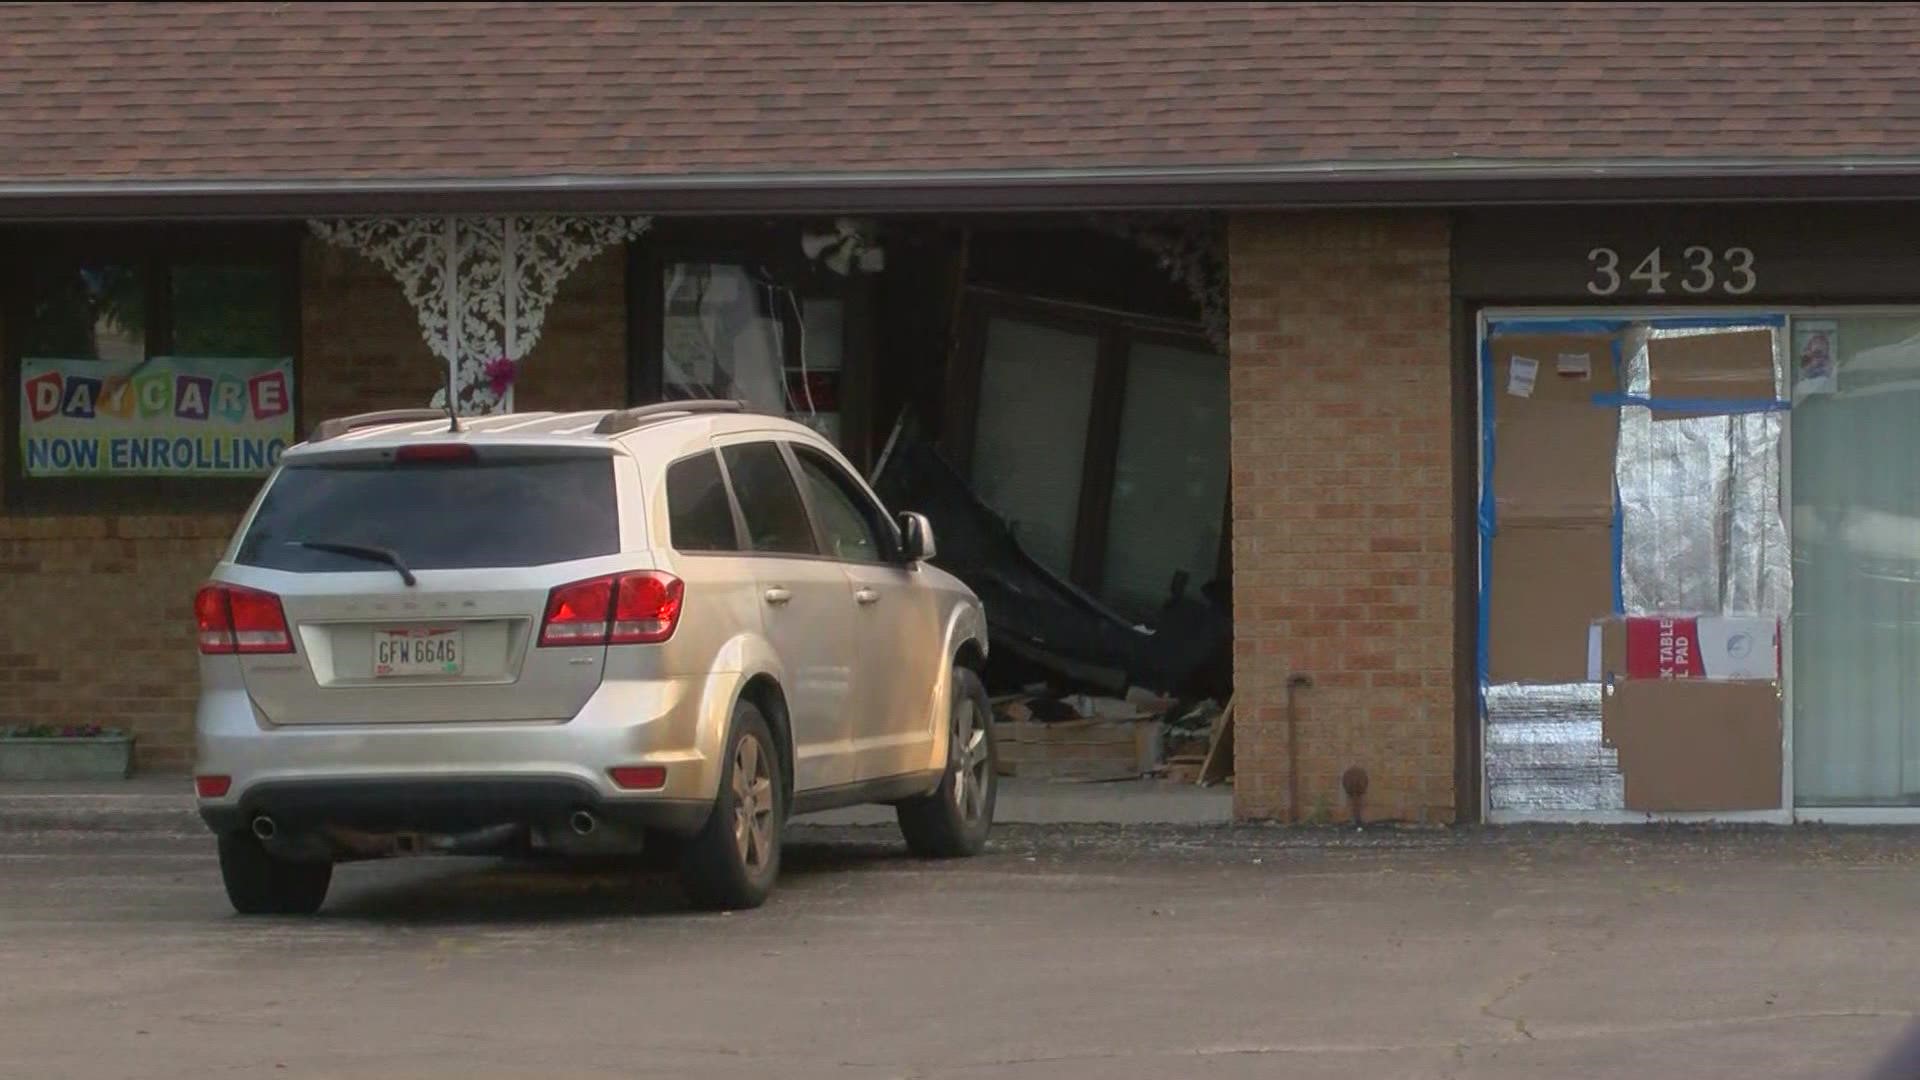 The crash happened at the Creative Learning Center just after 6 a.m. in Oregon, Ohio. No injuries have been reported.